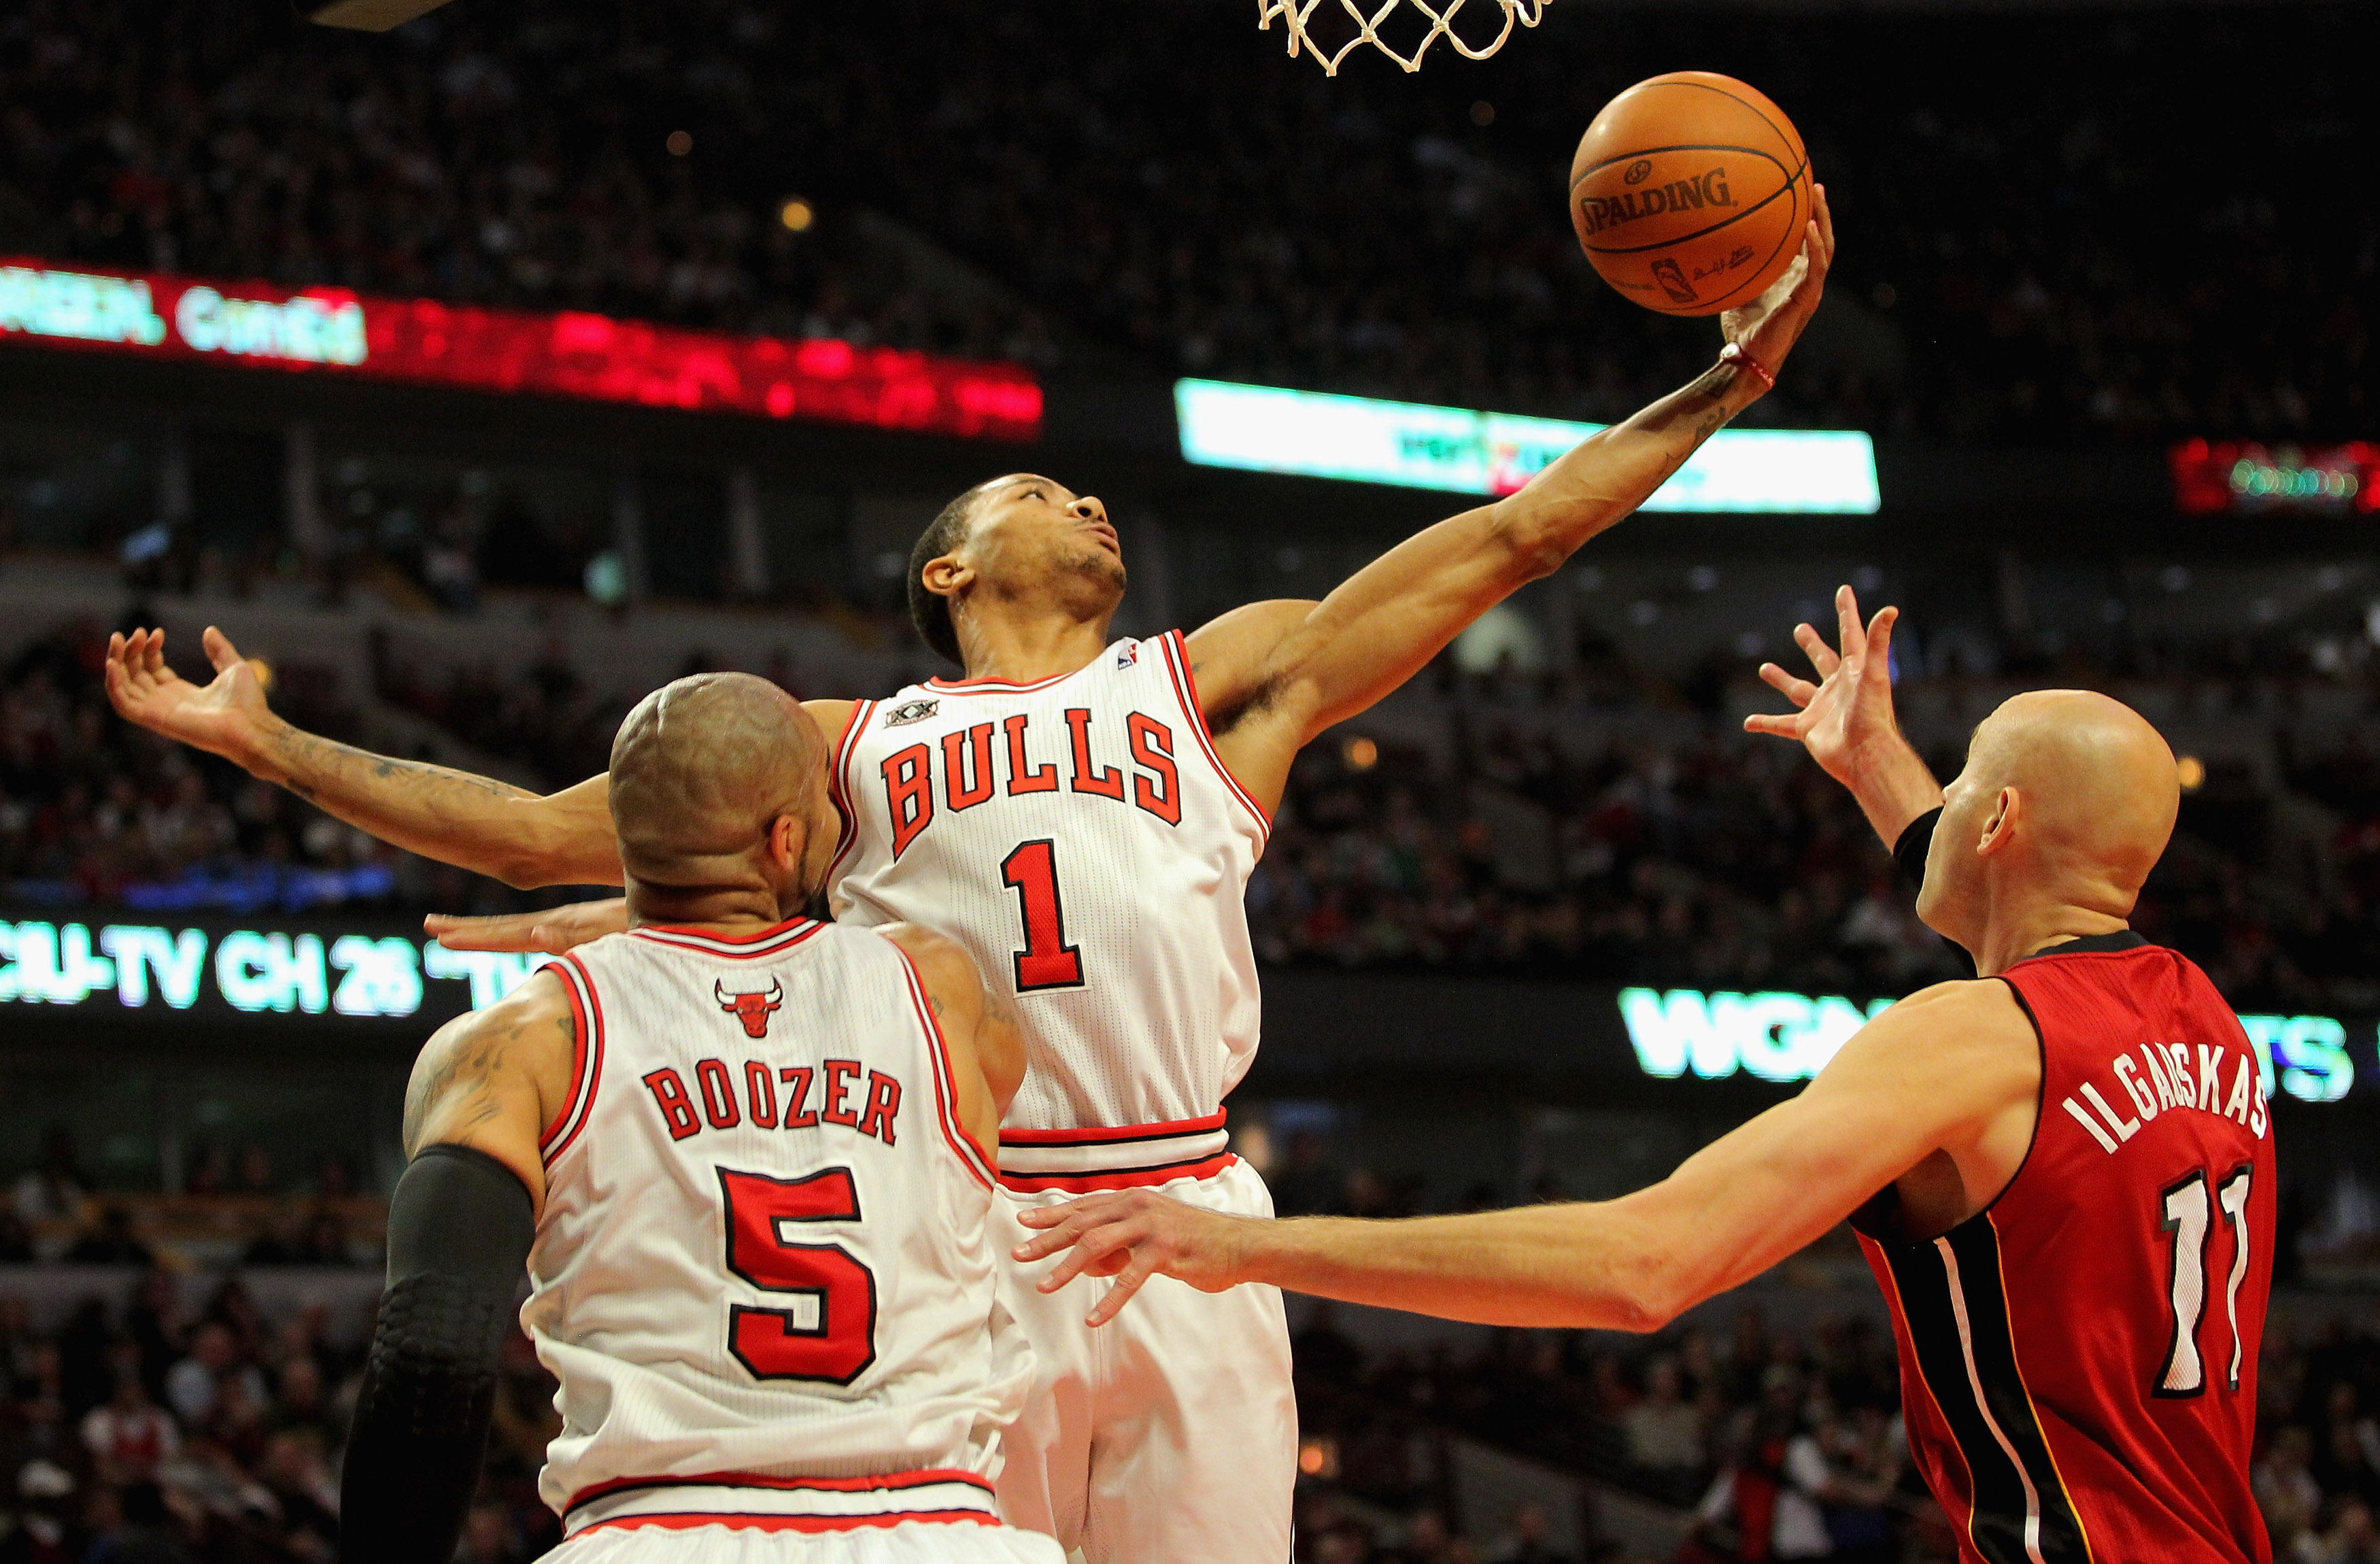 CHICAGO, IL - JANUARY 15:  Derrick Rose #1 of the Chicago Bulls collects a rebound infront of Carlos Boozer #5 of the Bulls and Zydrunas Ilgauskas #11 of the Miami Heat at the United Center on January 15, 2011 in Chicago, Illinois. NOTE TO USER: User expr